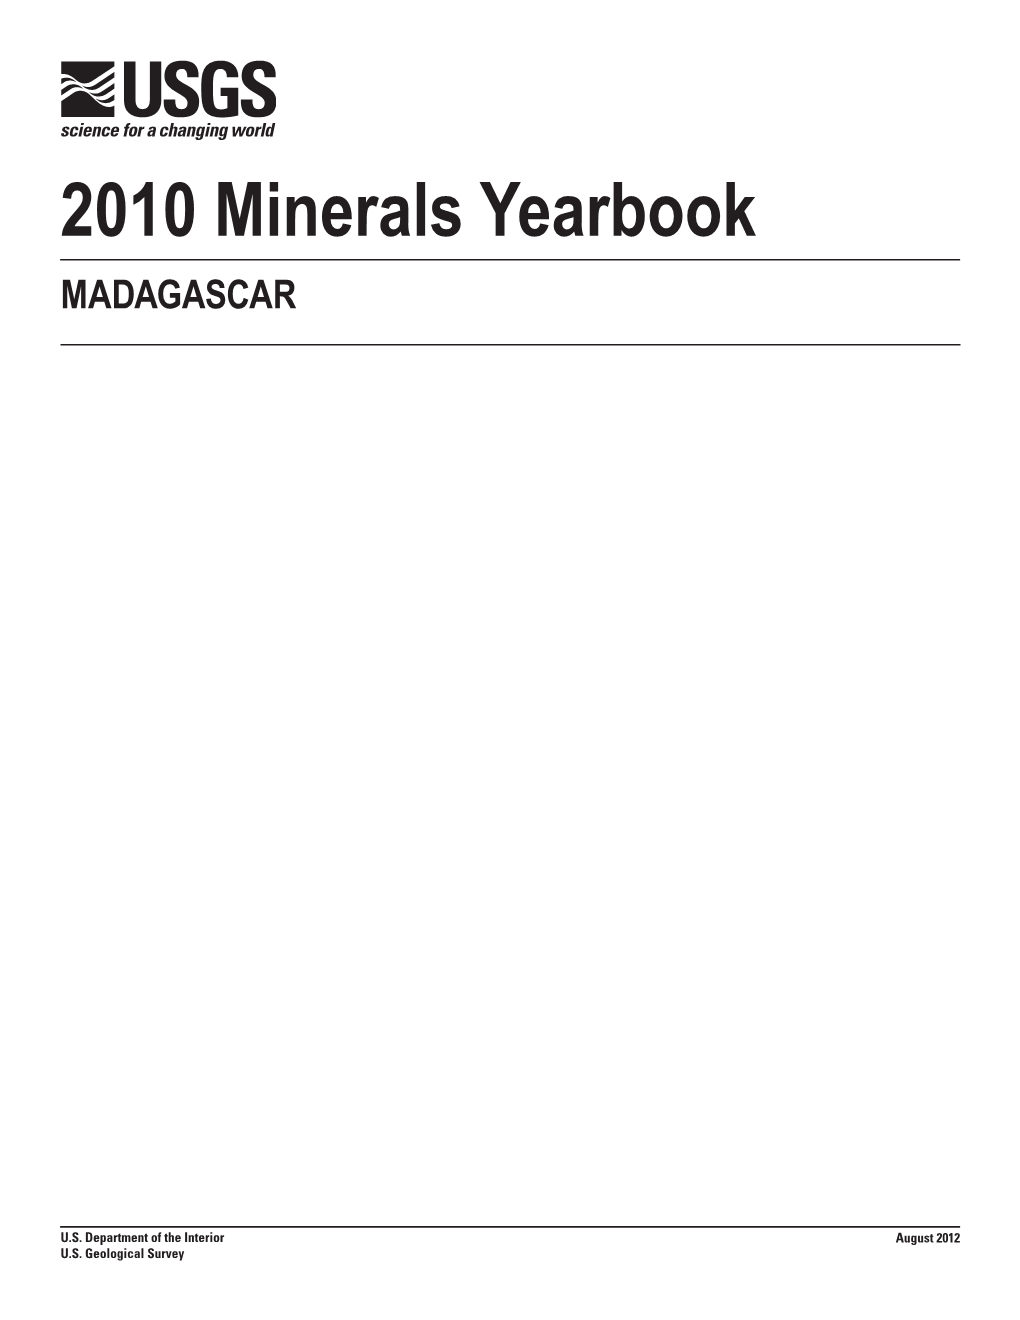 The Mineral Industry of Madagascar in 2010